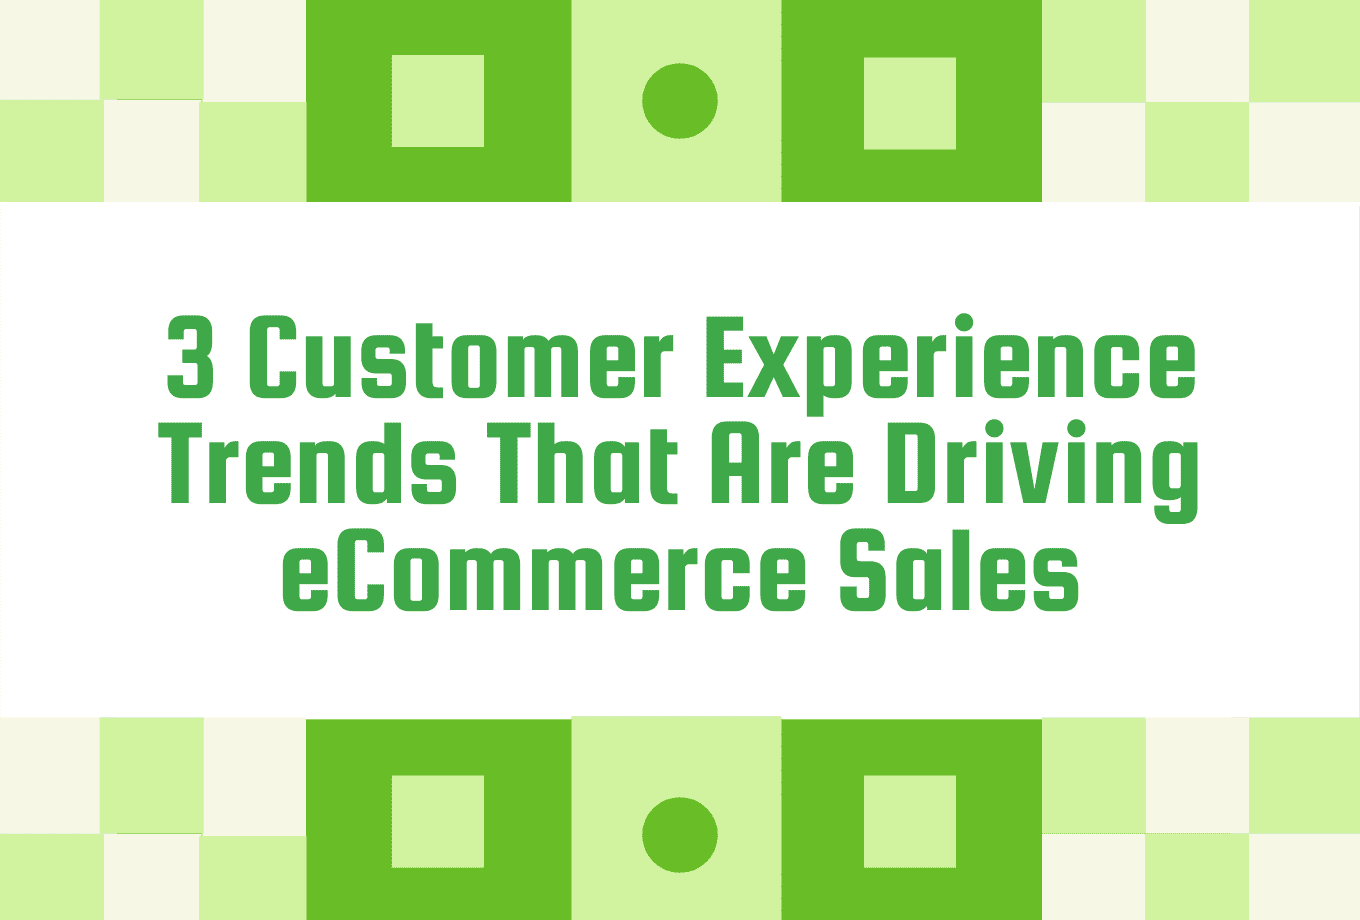 3 customer experience trends that are driving ecommerce sales